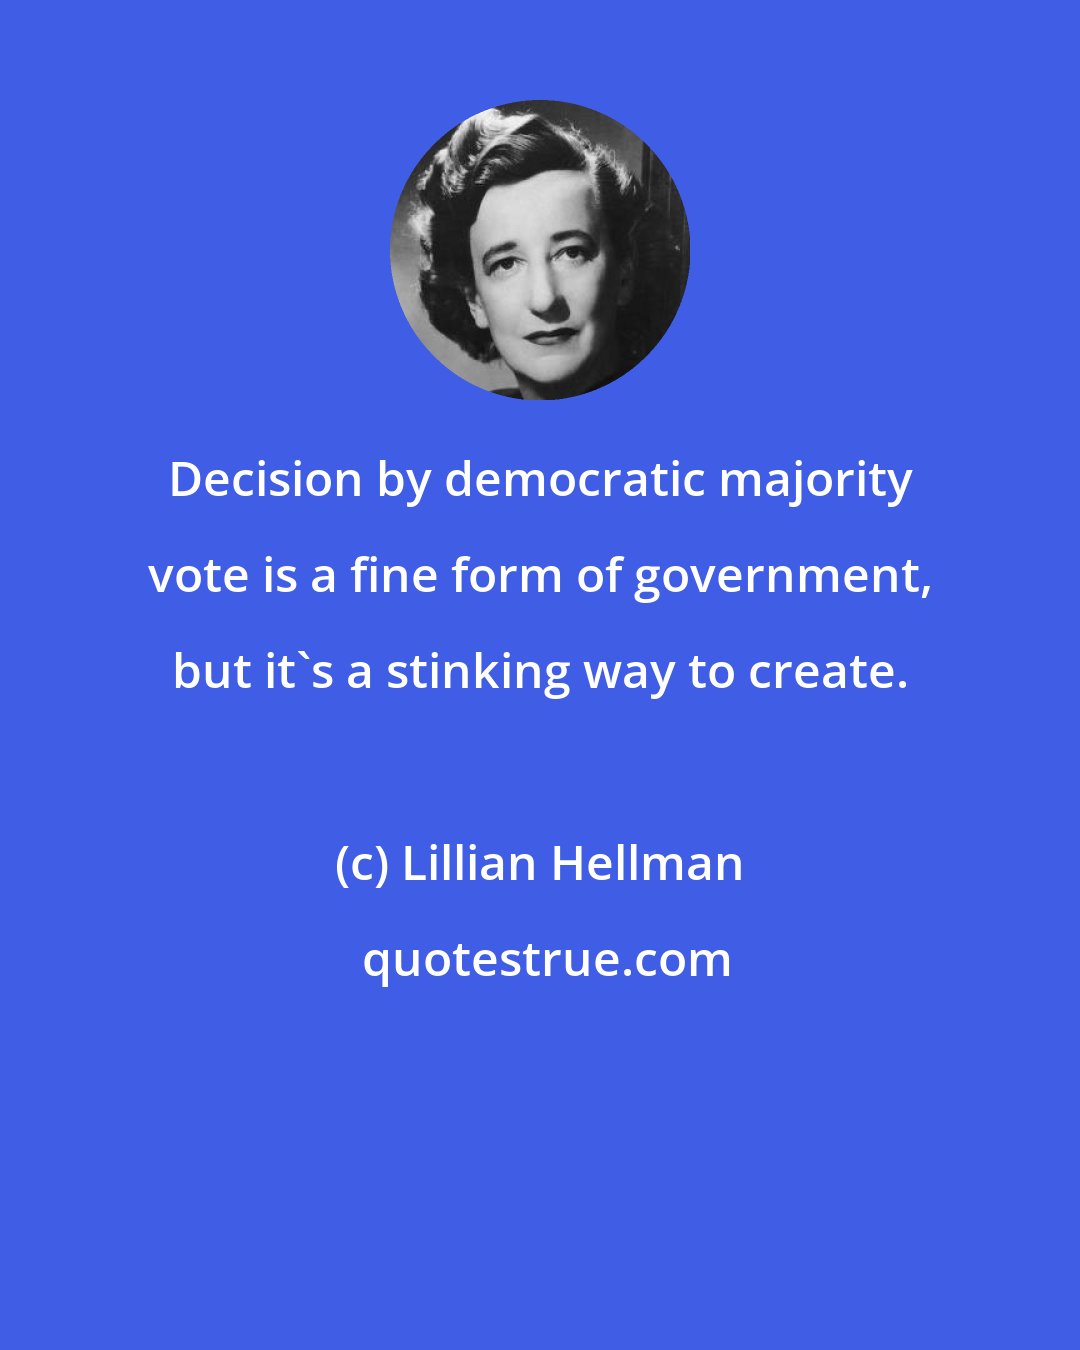 Lillian Hellman: Decision by democratic majority vote is a fine form of government, but it's a stinking way to create.